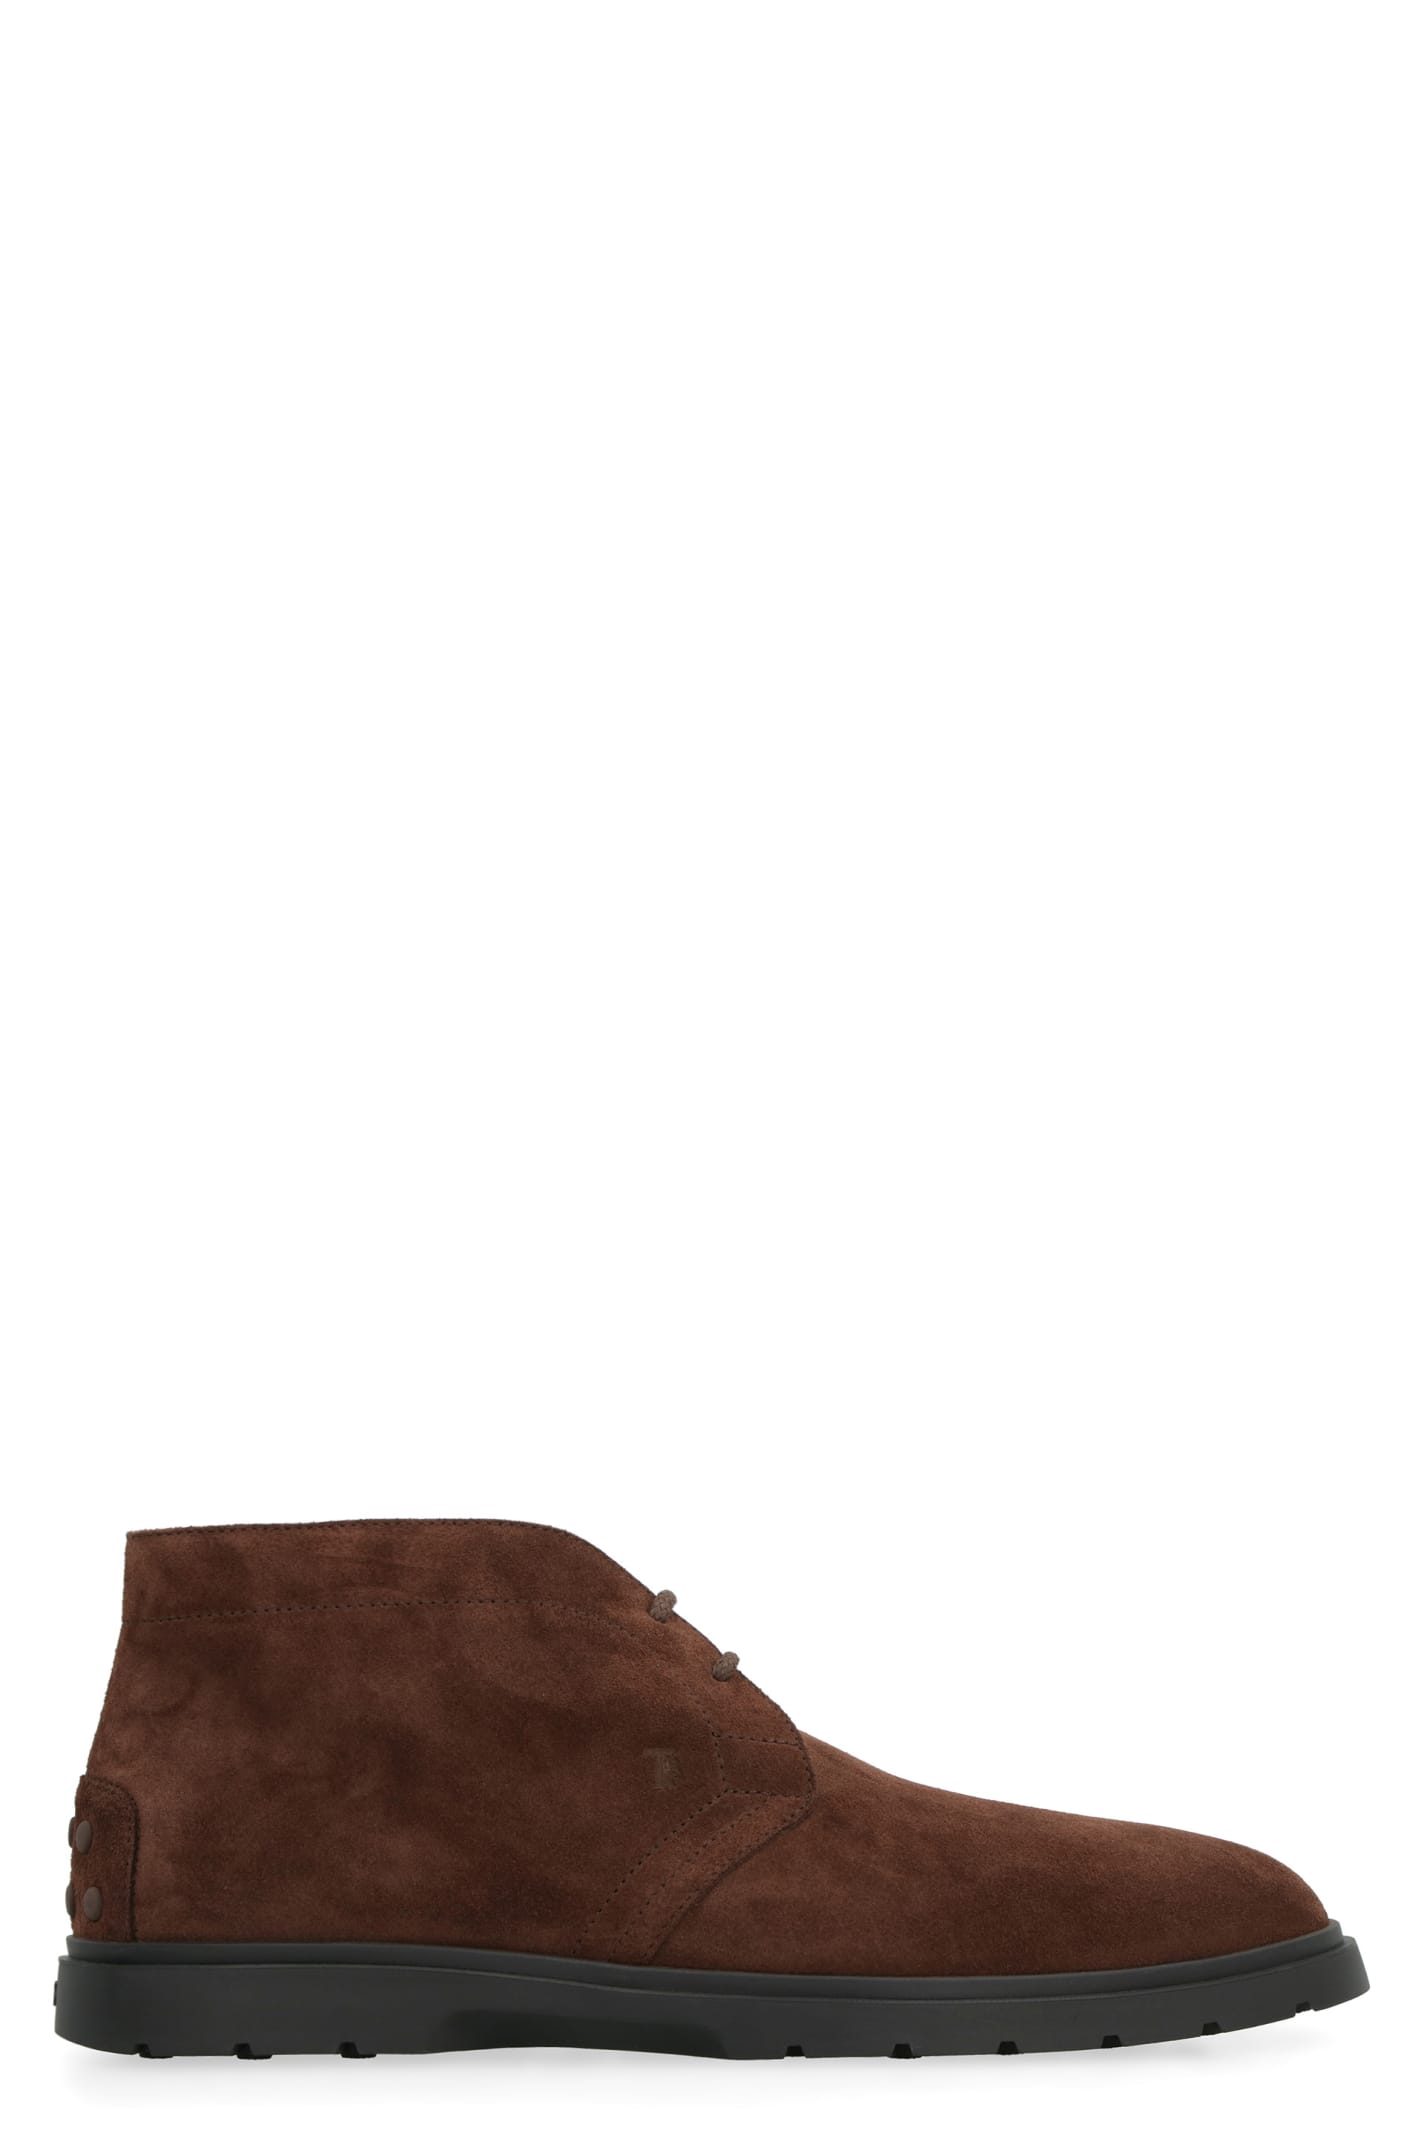 TOD'S SUEDE DESERT-BOOTS